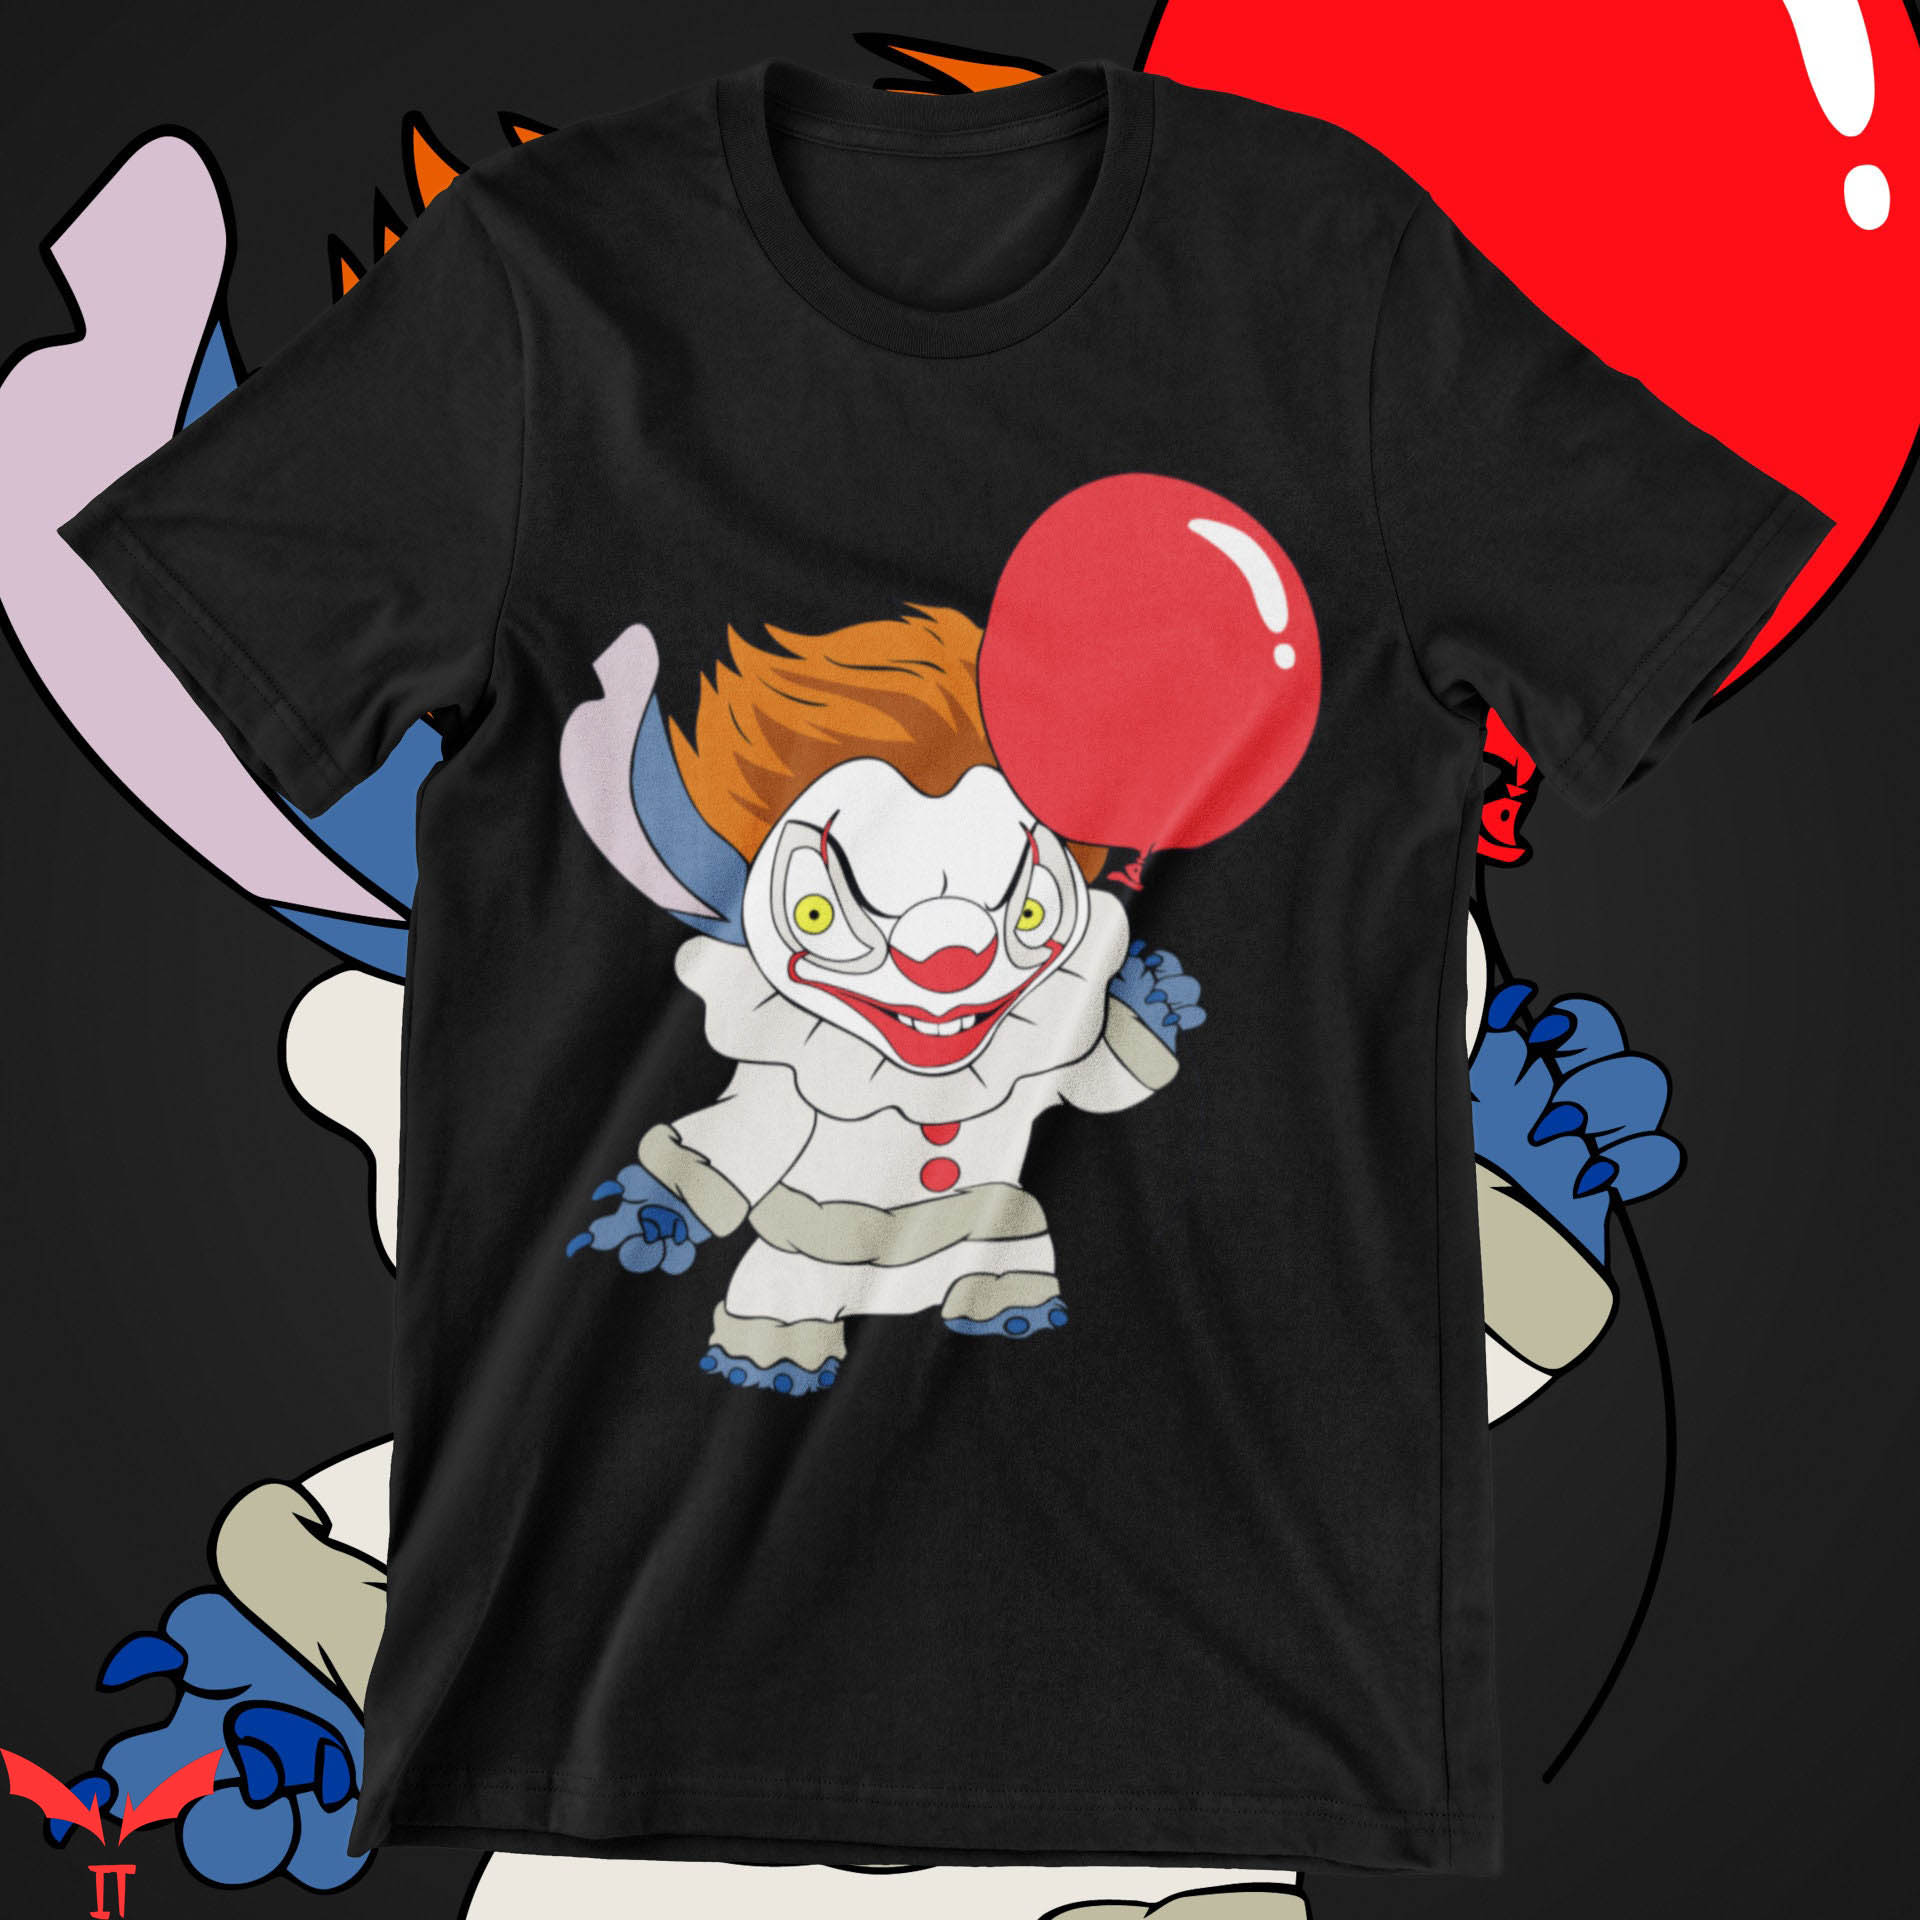 We All Float Down Here T-Shirt PennyWise Stitch Halloween IT